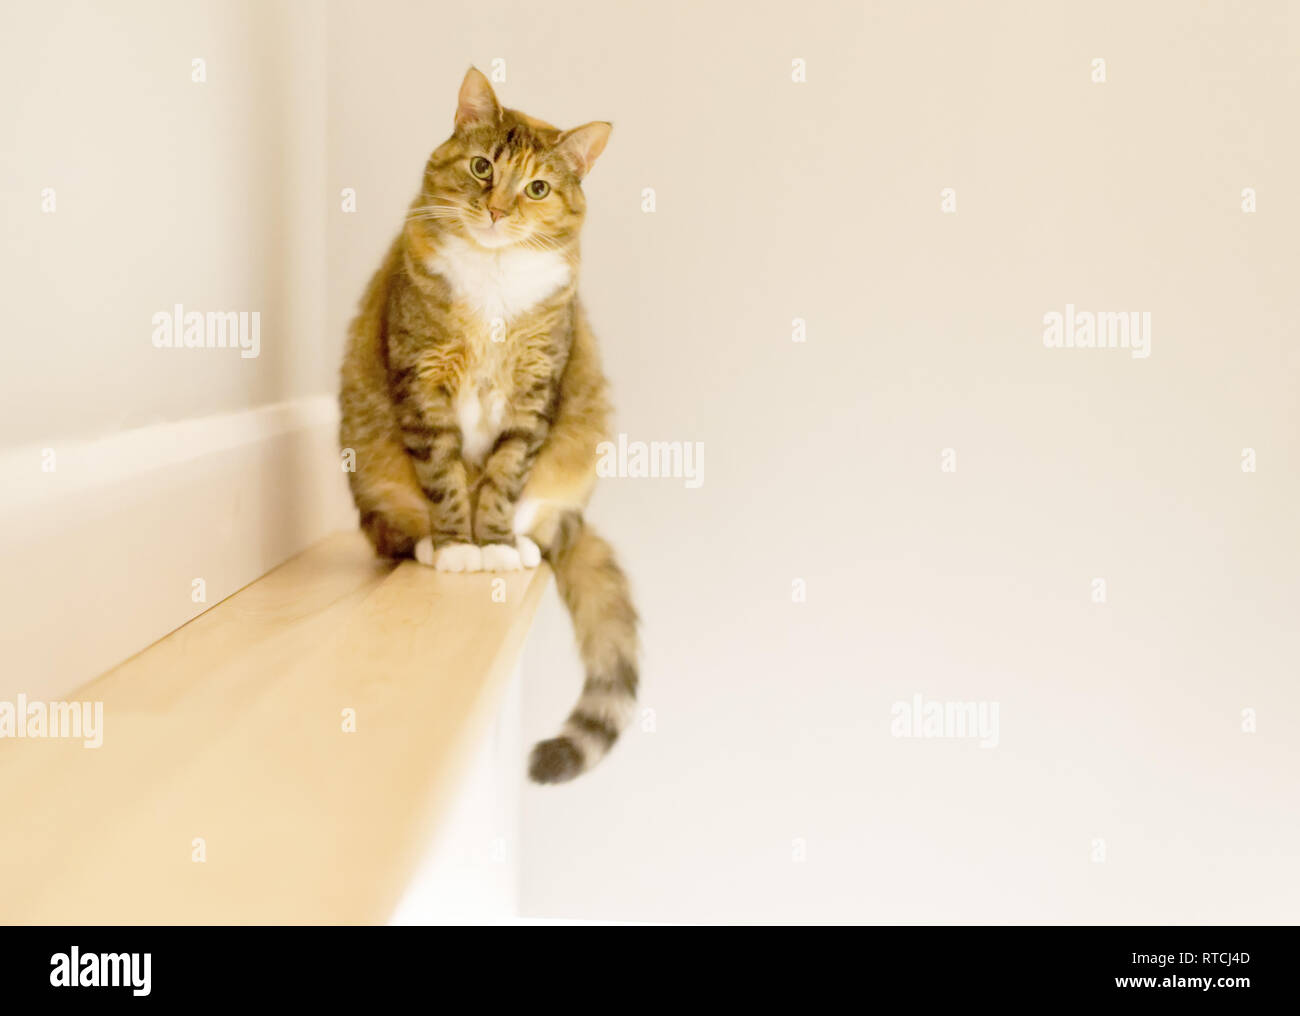 A tabby cat sat on a small shelf looking curiously at the photographer Stock Photo